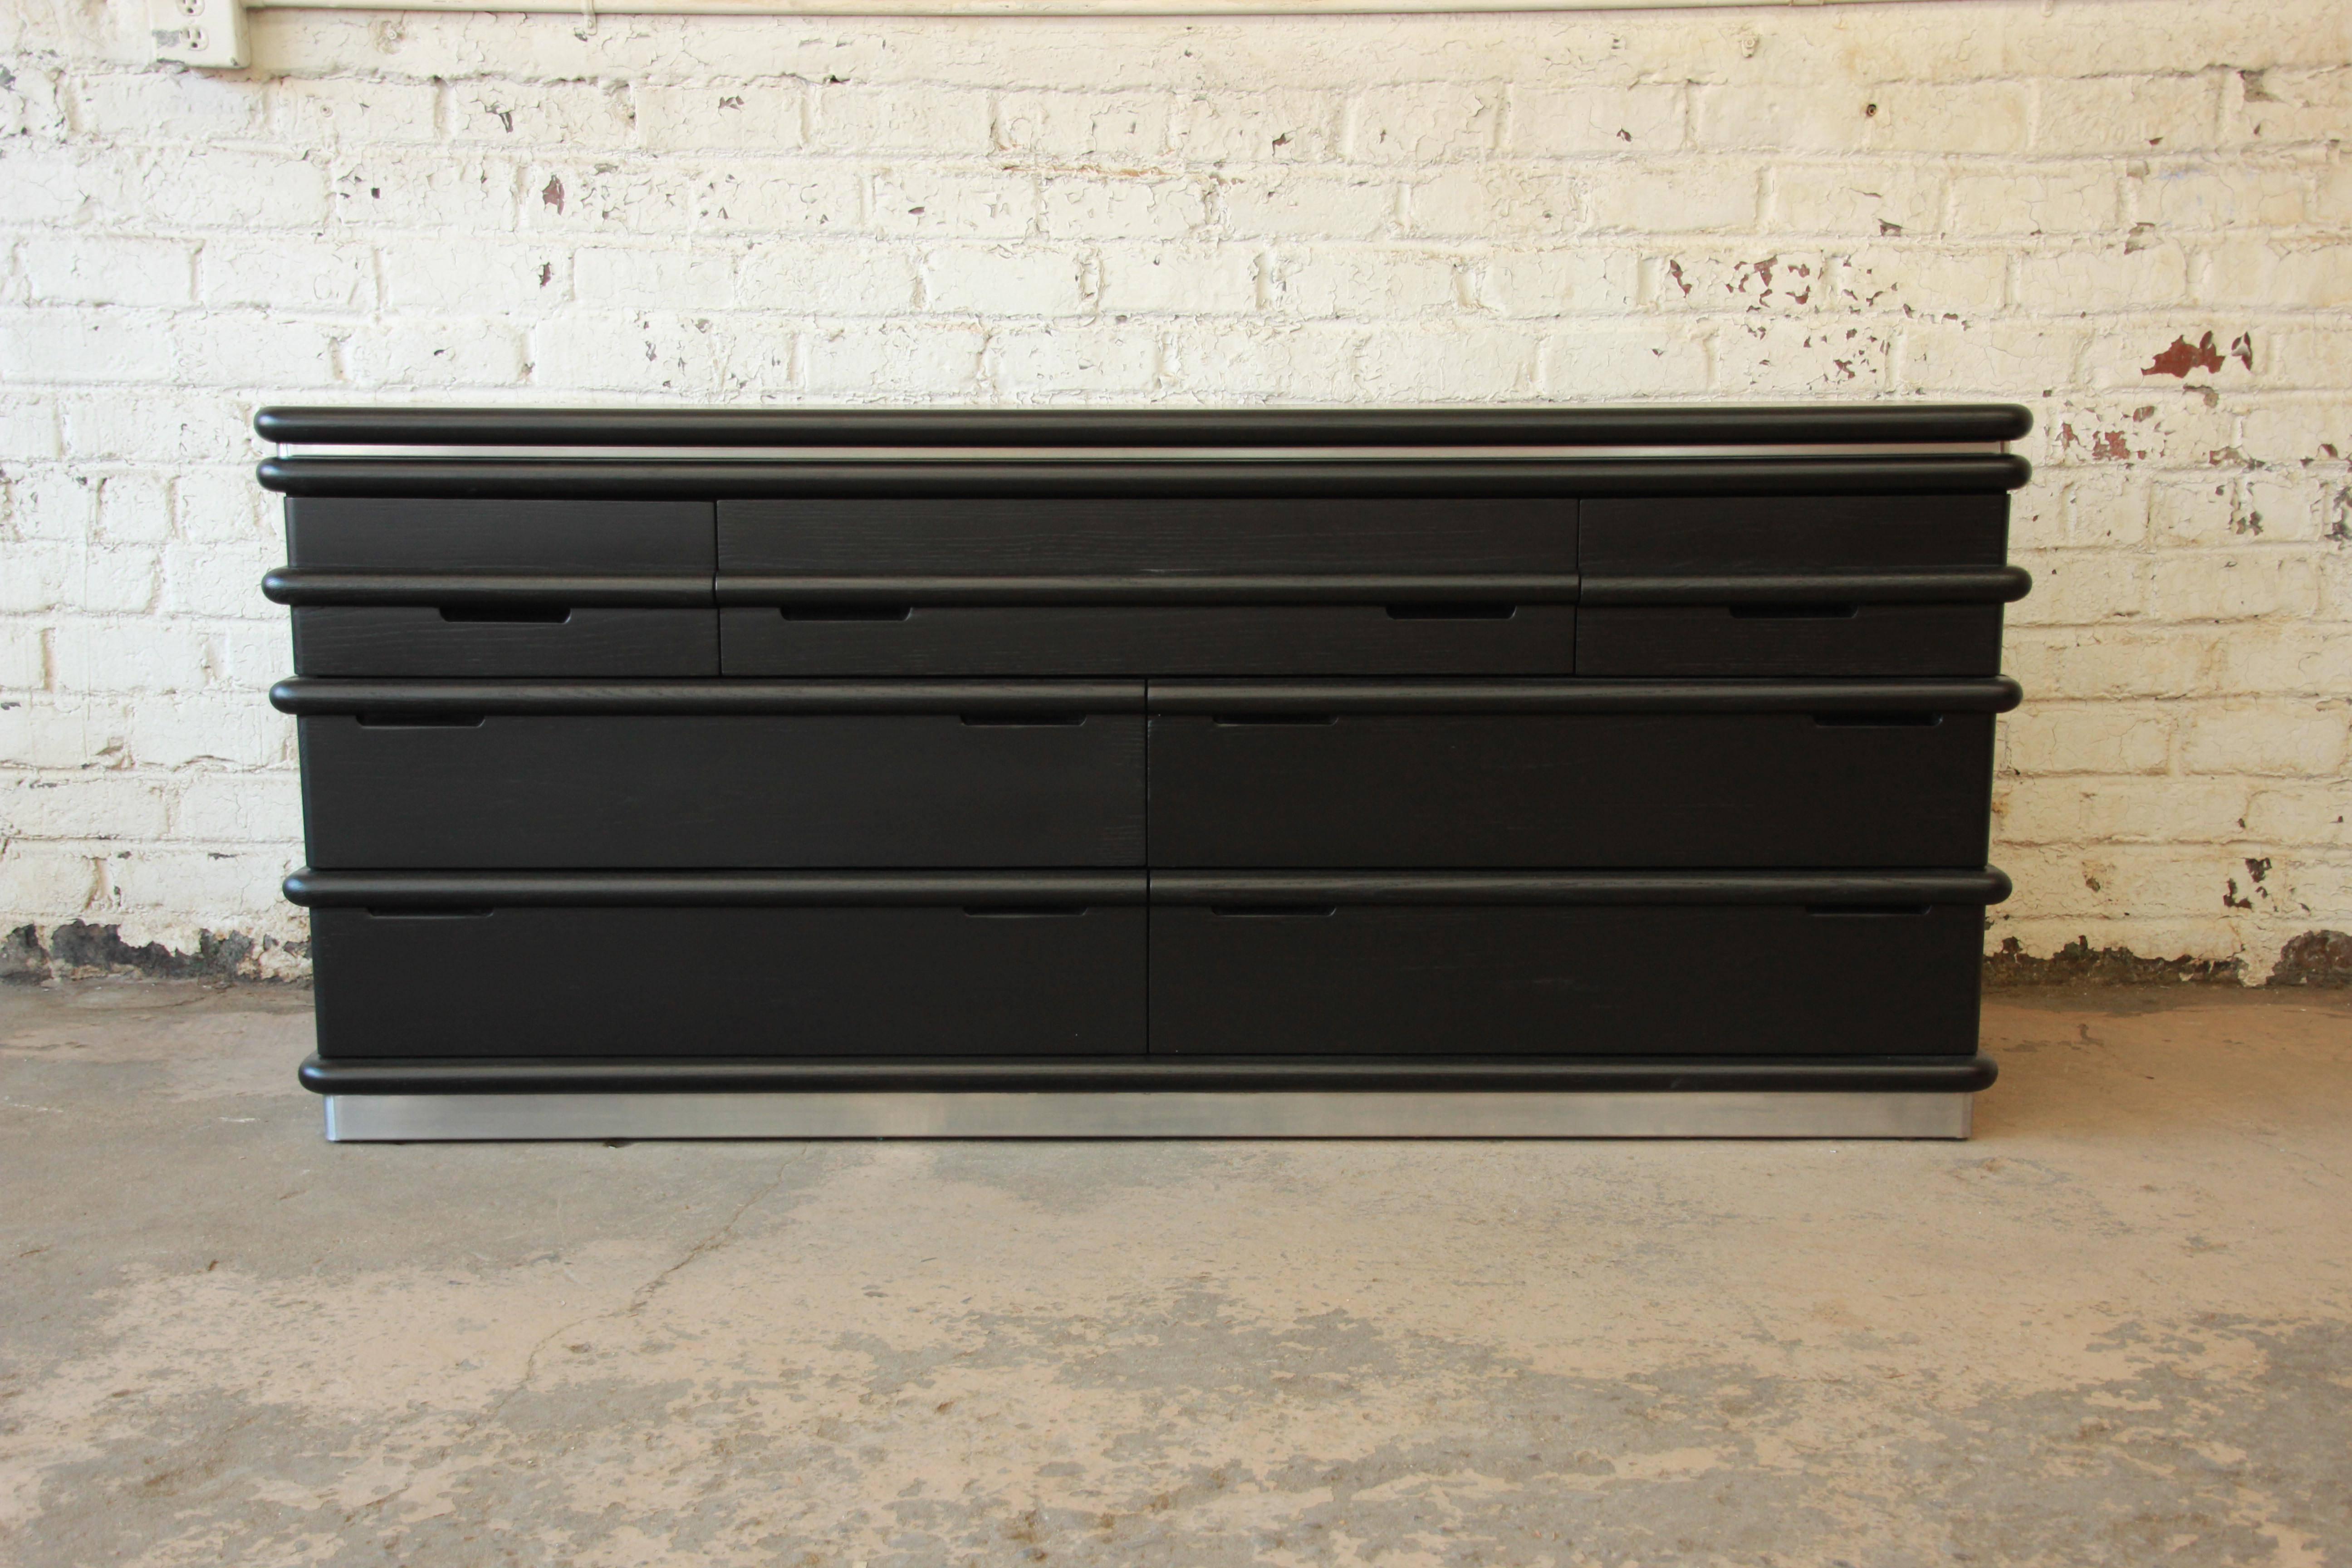 Refinished in black lacquer solid oak and chrome dresser designed by Jay Spectre for Century Furniture. The dresser features an attractive cerused finish, as well as carved rounded borders and chrome bands at the top and bottom. The dresser is well